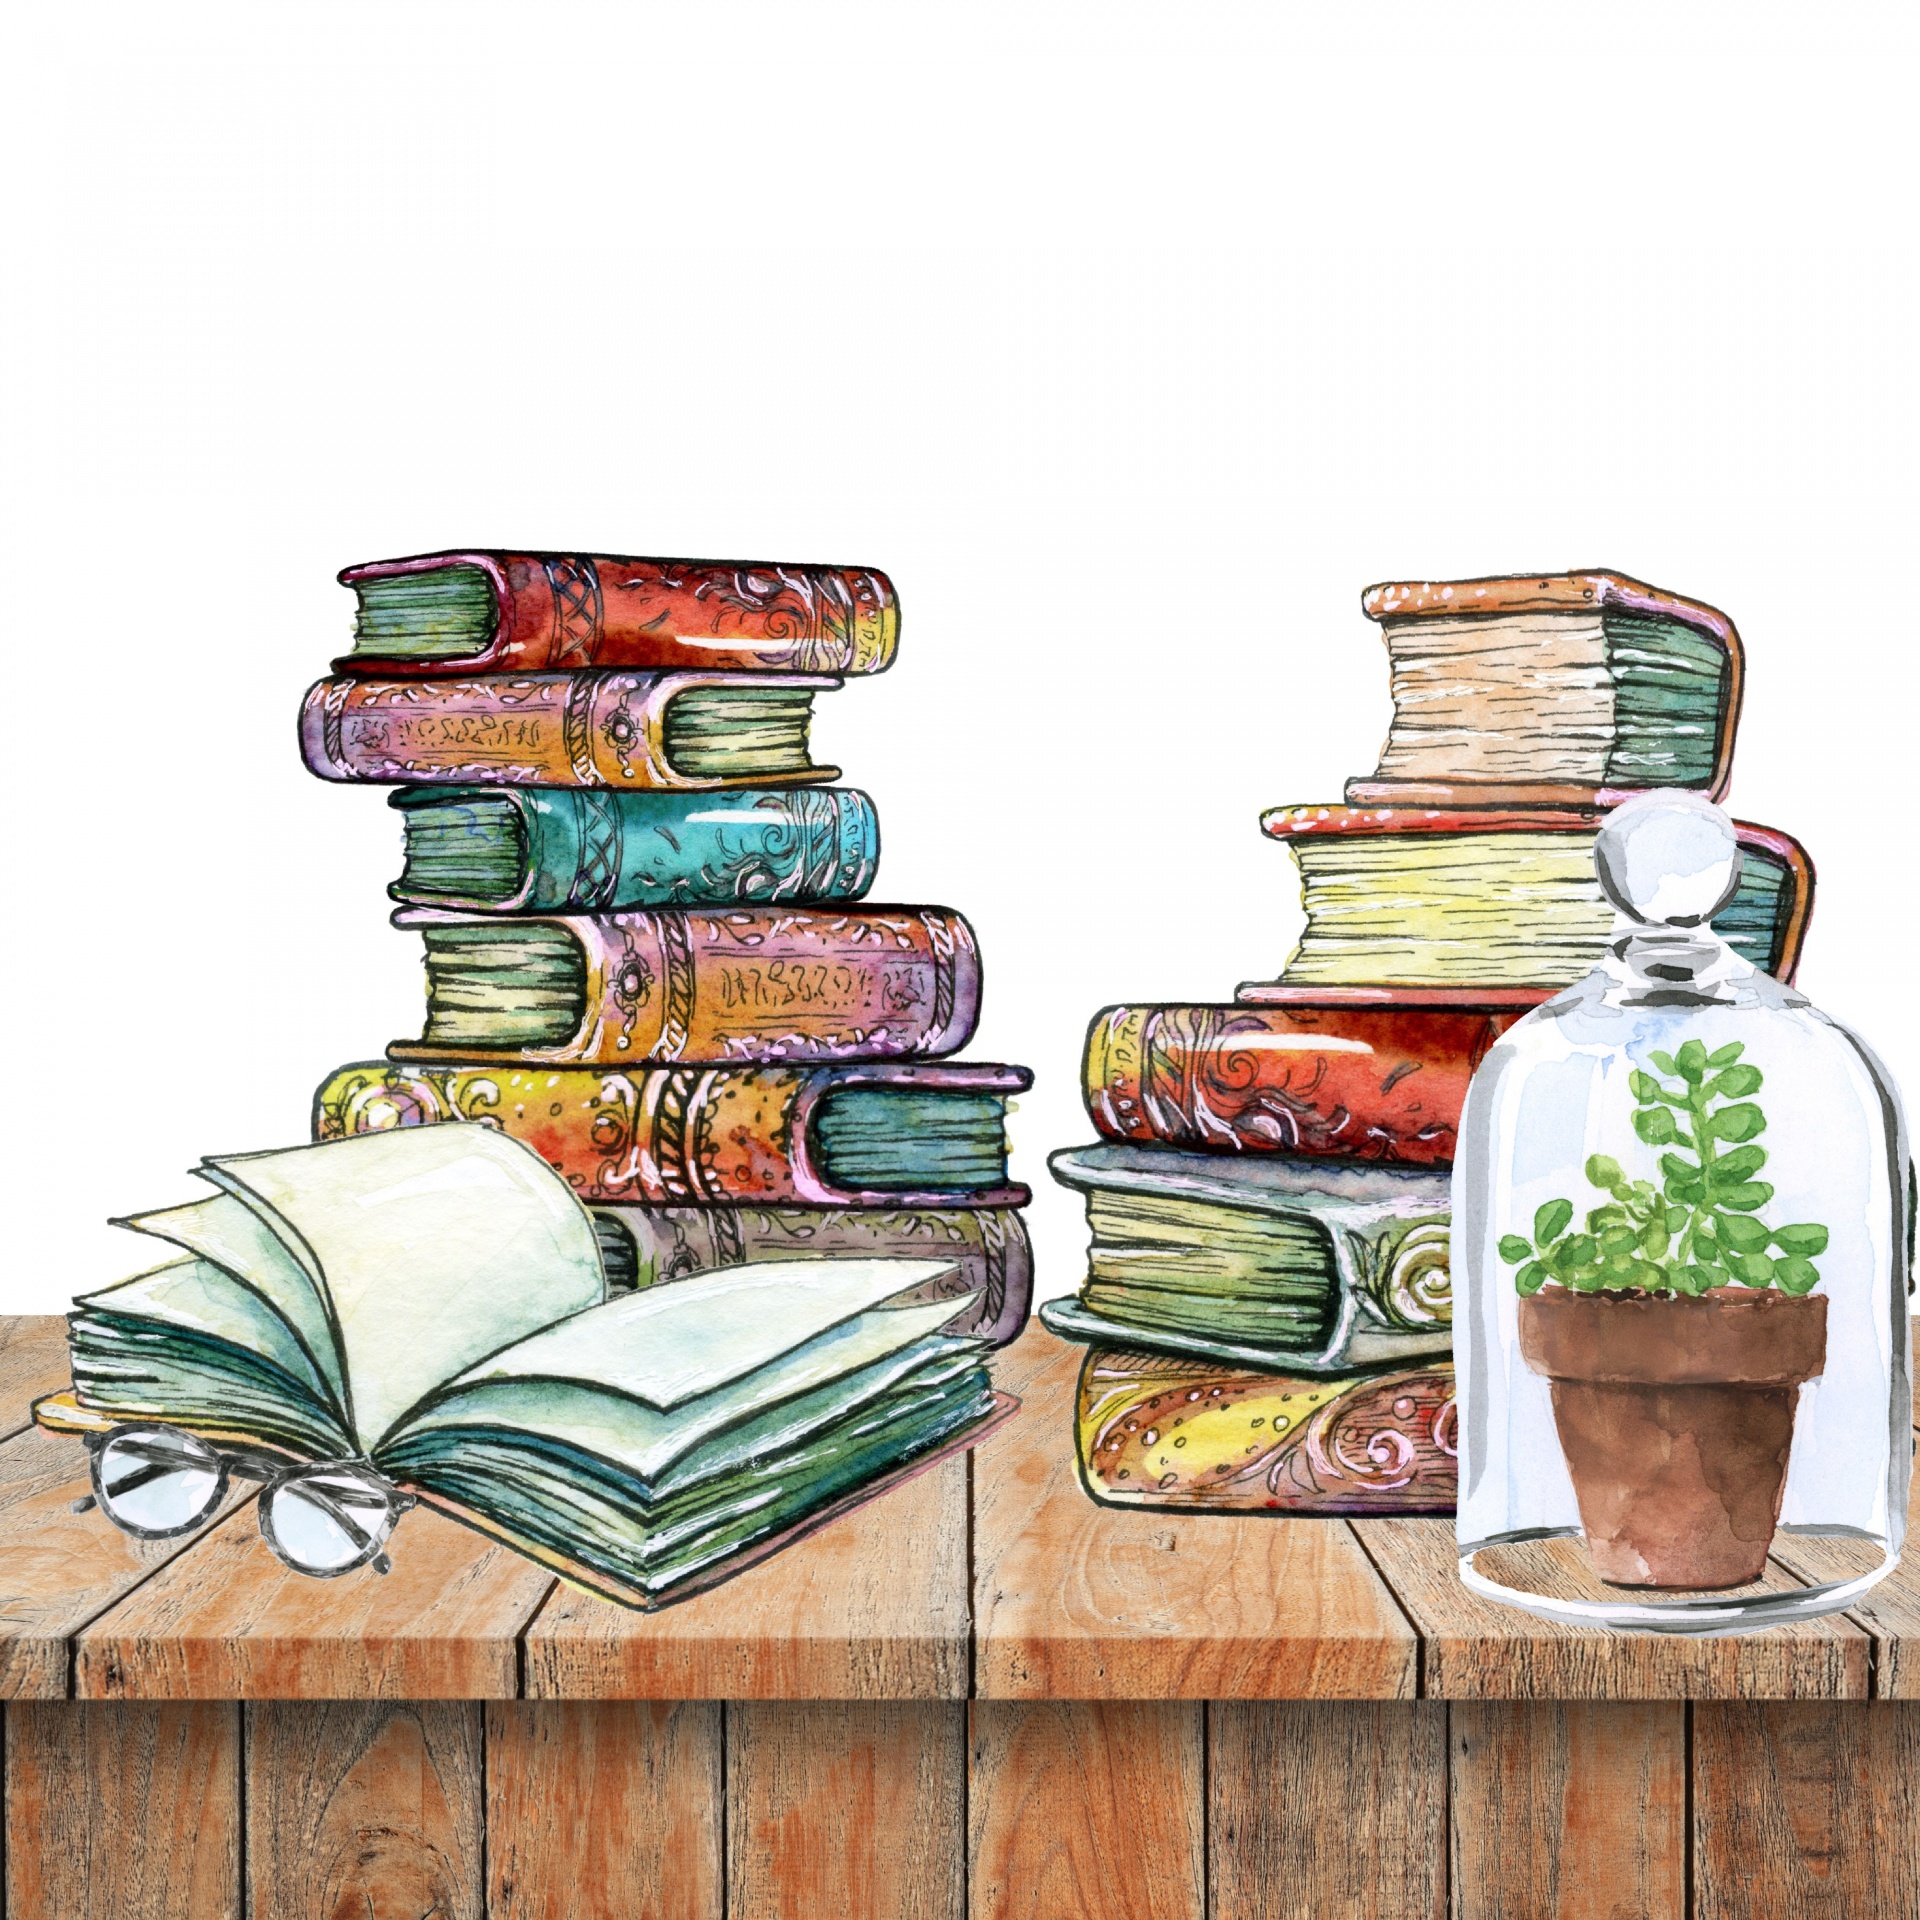 beautiful books piled on a wooden table with a a small terrarium and glasses